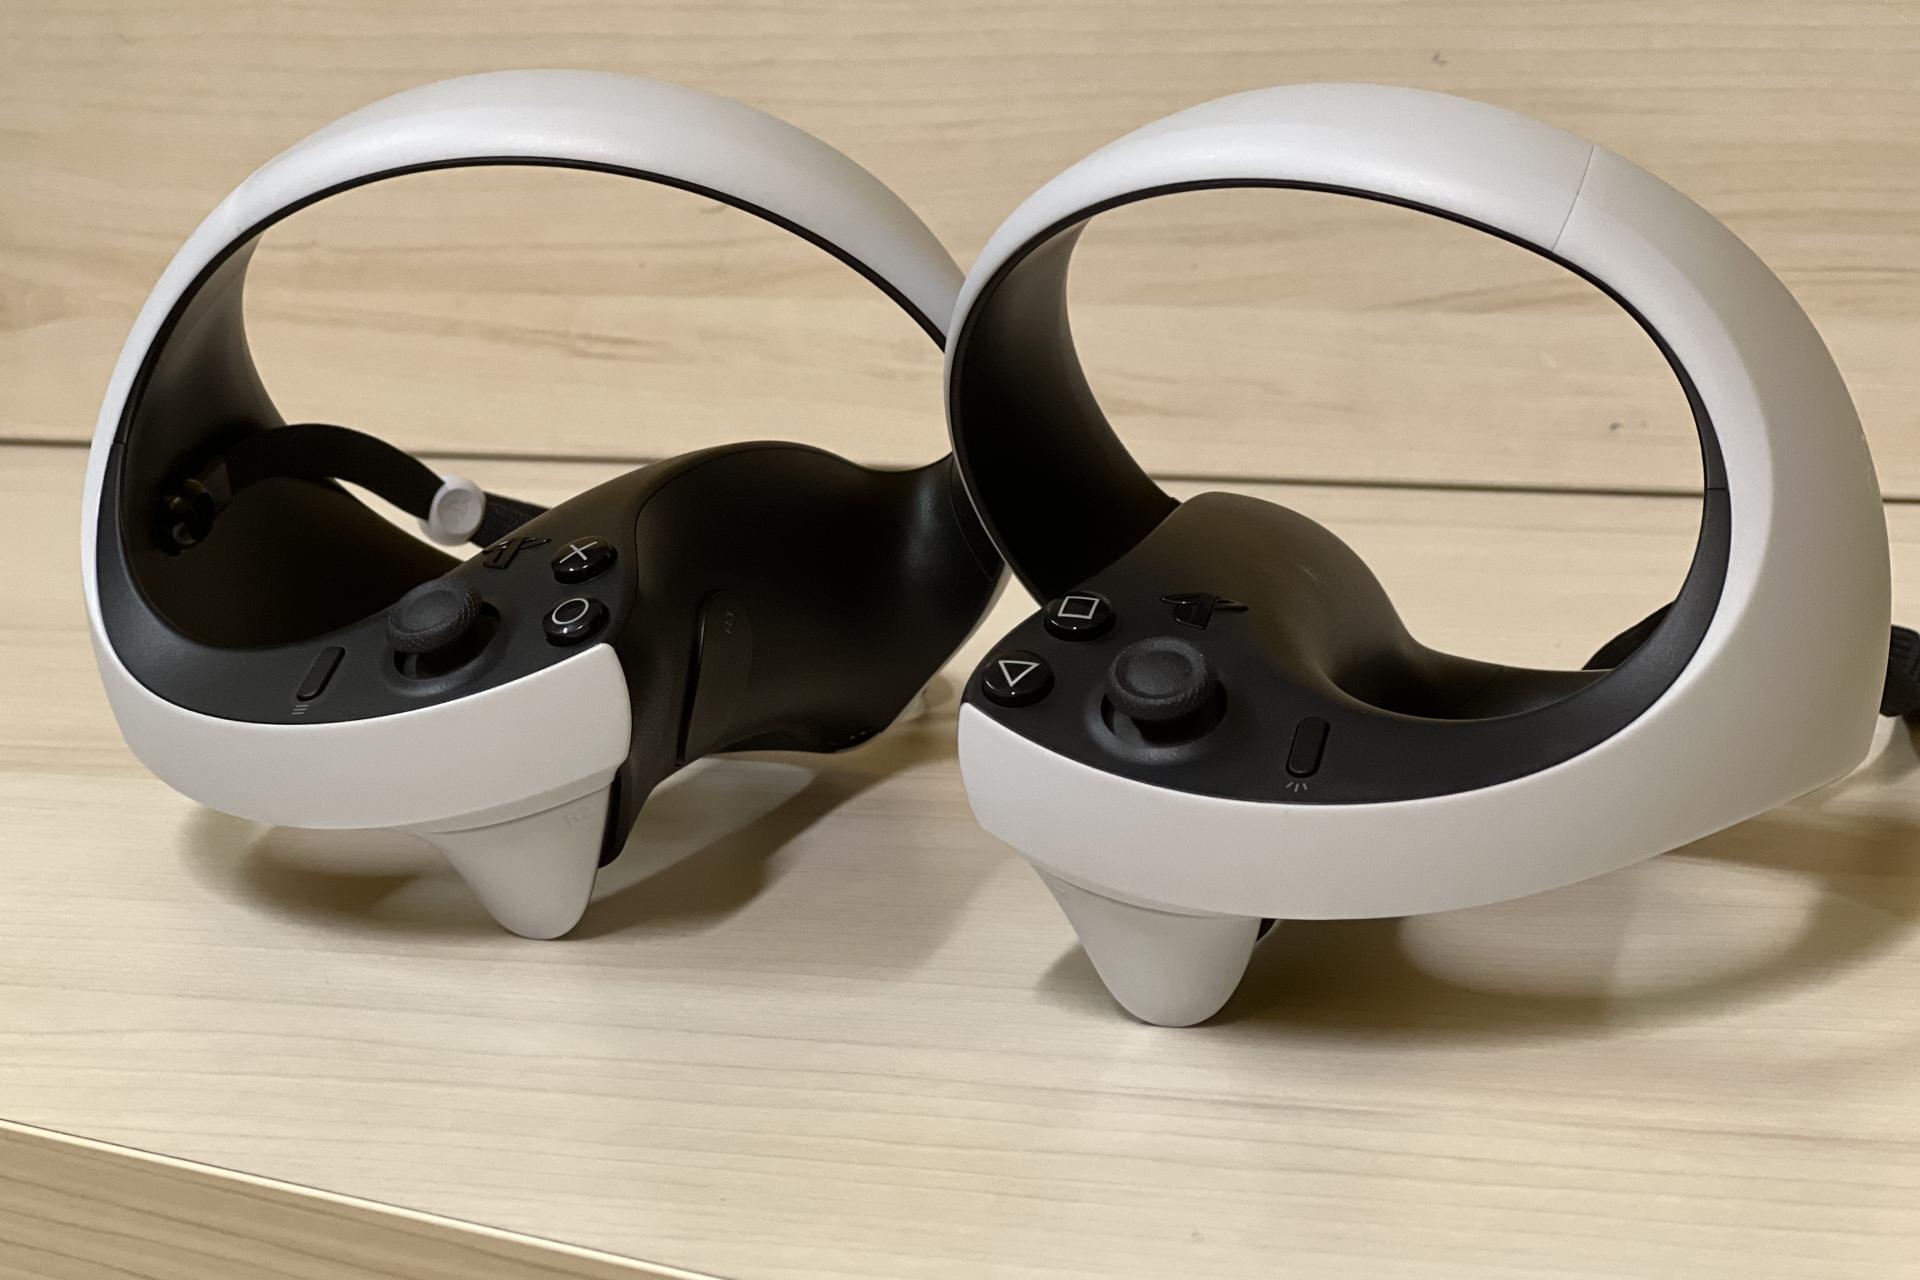 The short time needed to become familiar with the VR 2 Sense controllers reminds us that we are formatted by the design of traditional controllers, inherited from the PlayStation 1.